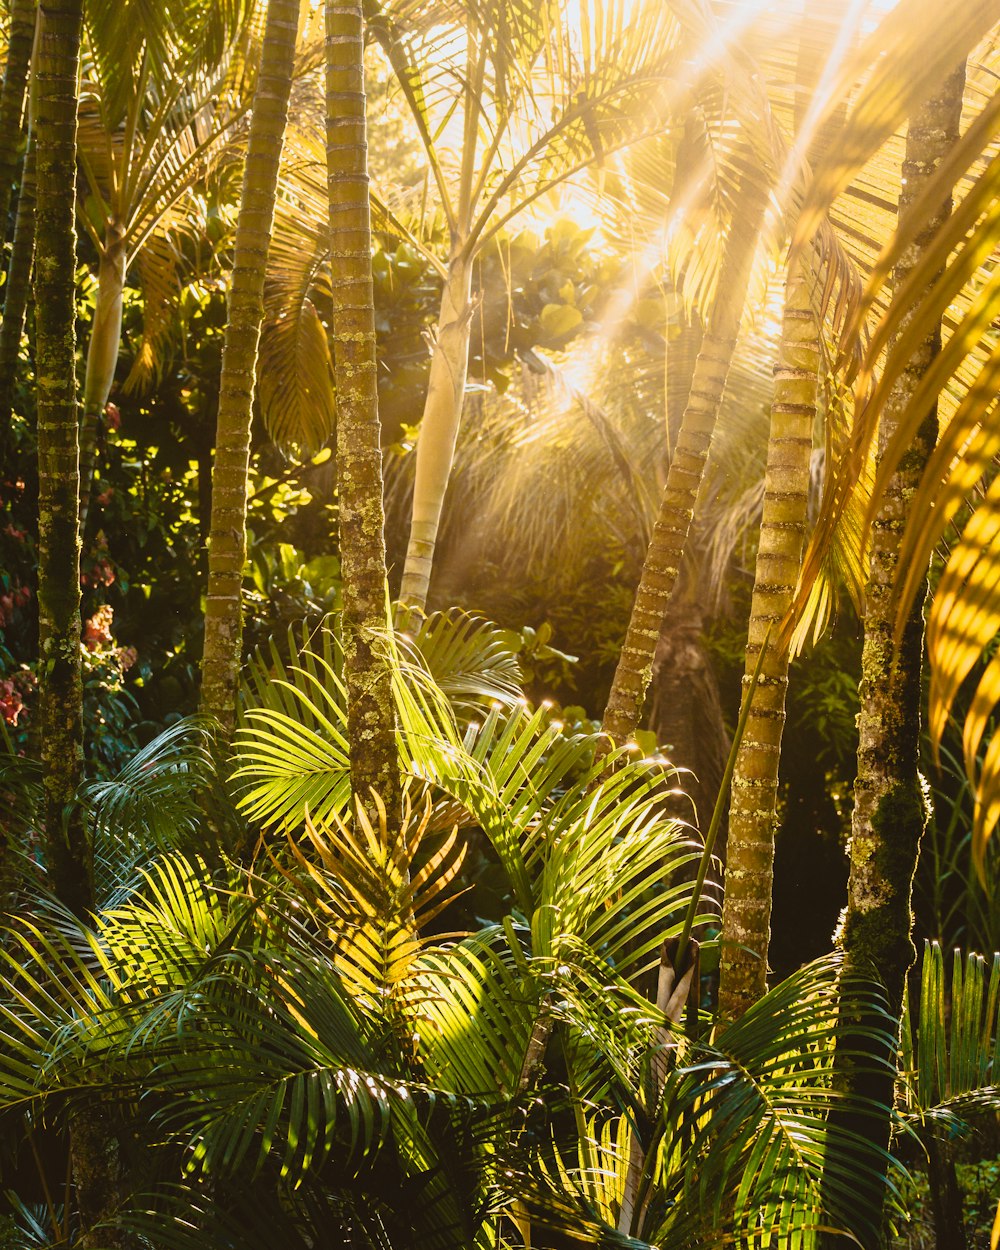 the sun shines through the palm trees in the jungle